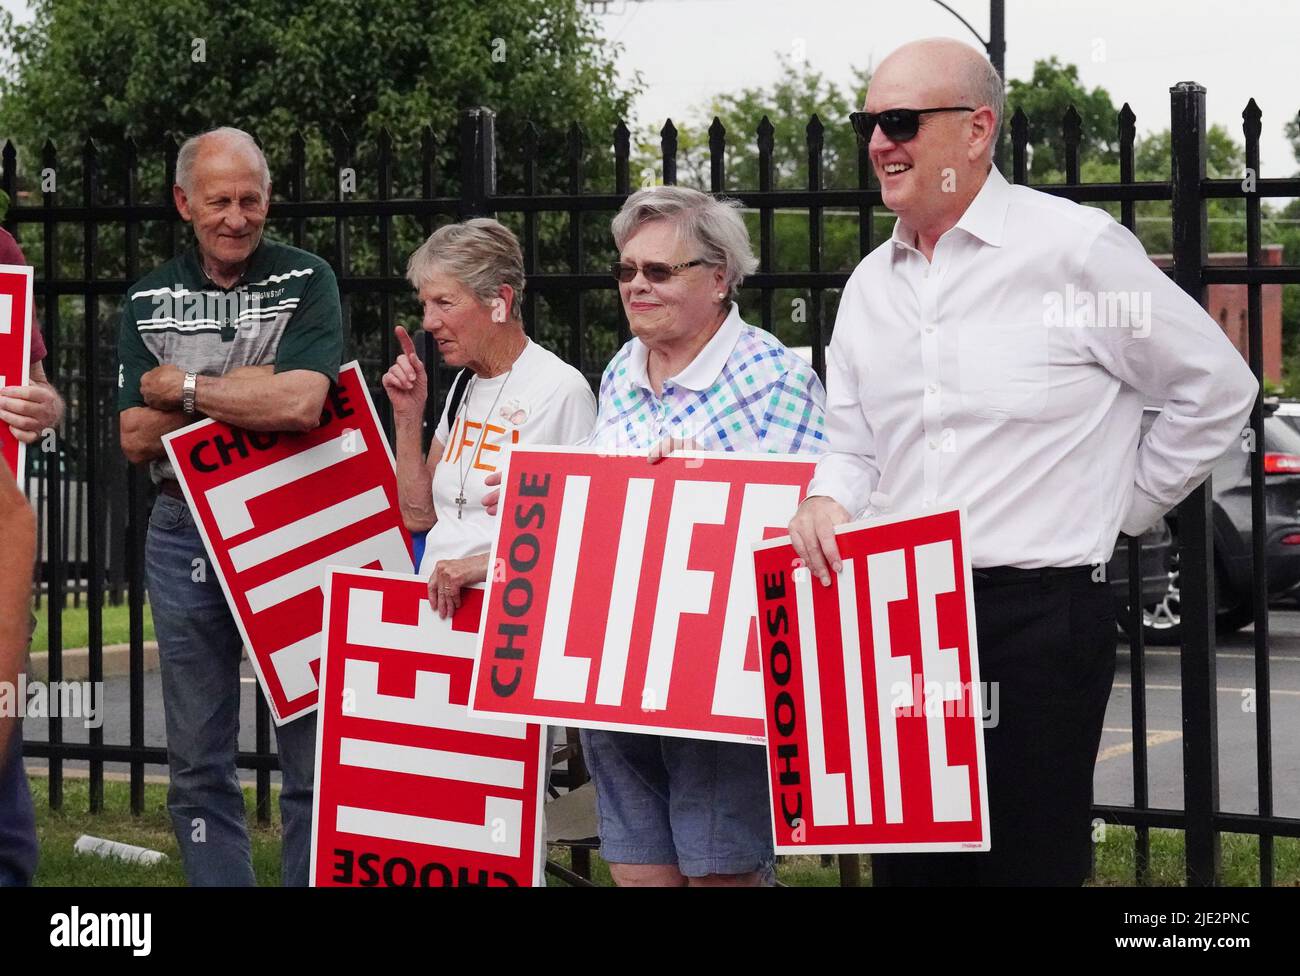 St. Louis, United States. 24th June, 2022. Pro Life supporters assemble outside of Planned Parenthood, hours after the Supreme Court's decision overturning the 1973 Roe v. Wade ruling, in St. Louis on Friday, June 24, 2022. Missouri Gov. Mike Parson, signed a proclamation on June 24, 2022, effectively ending abortion in the state. Photo by Bill Greenblatt/UPI Credit: UPI/Alamy Live News Stock Photo